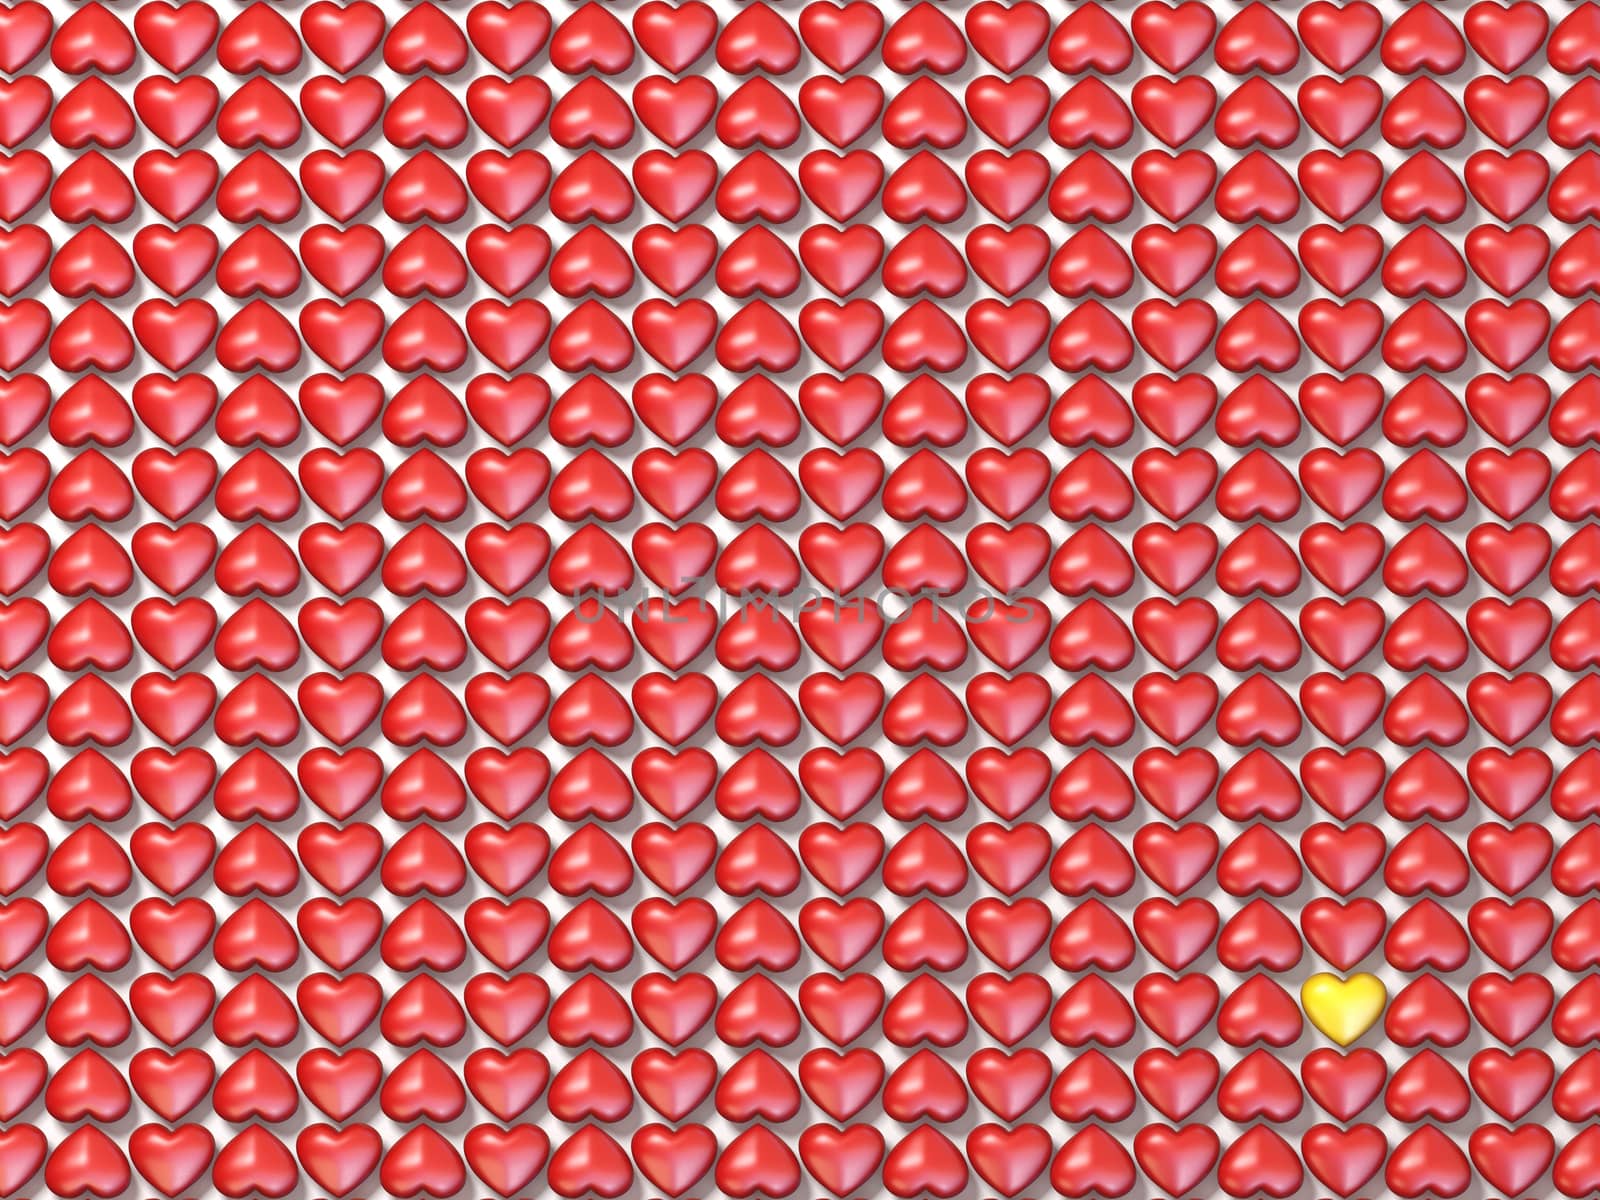 Red hearts field and one yellow heart 3D rendering illustration